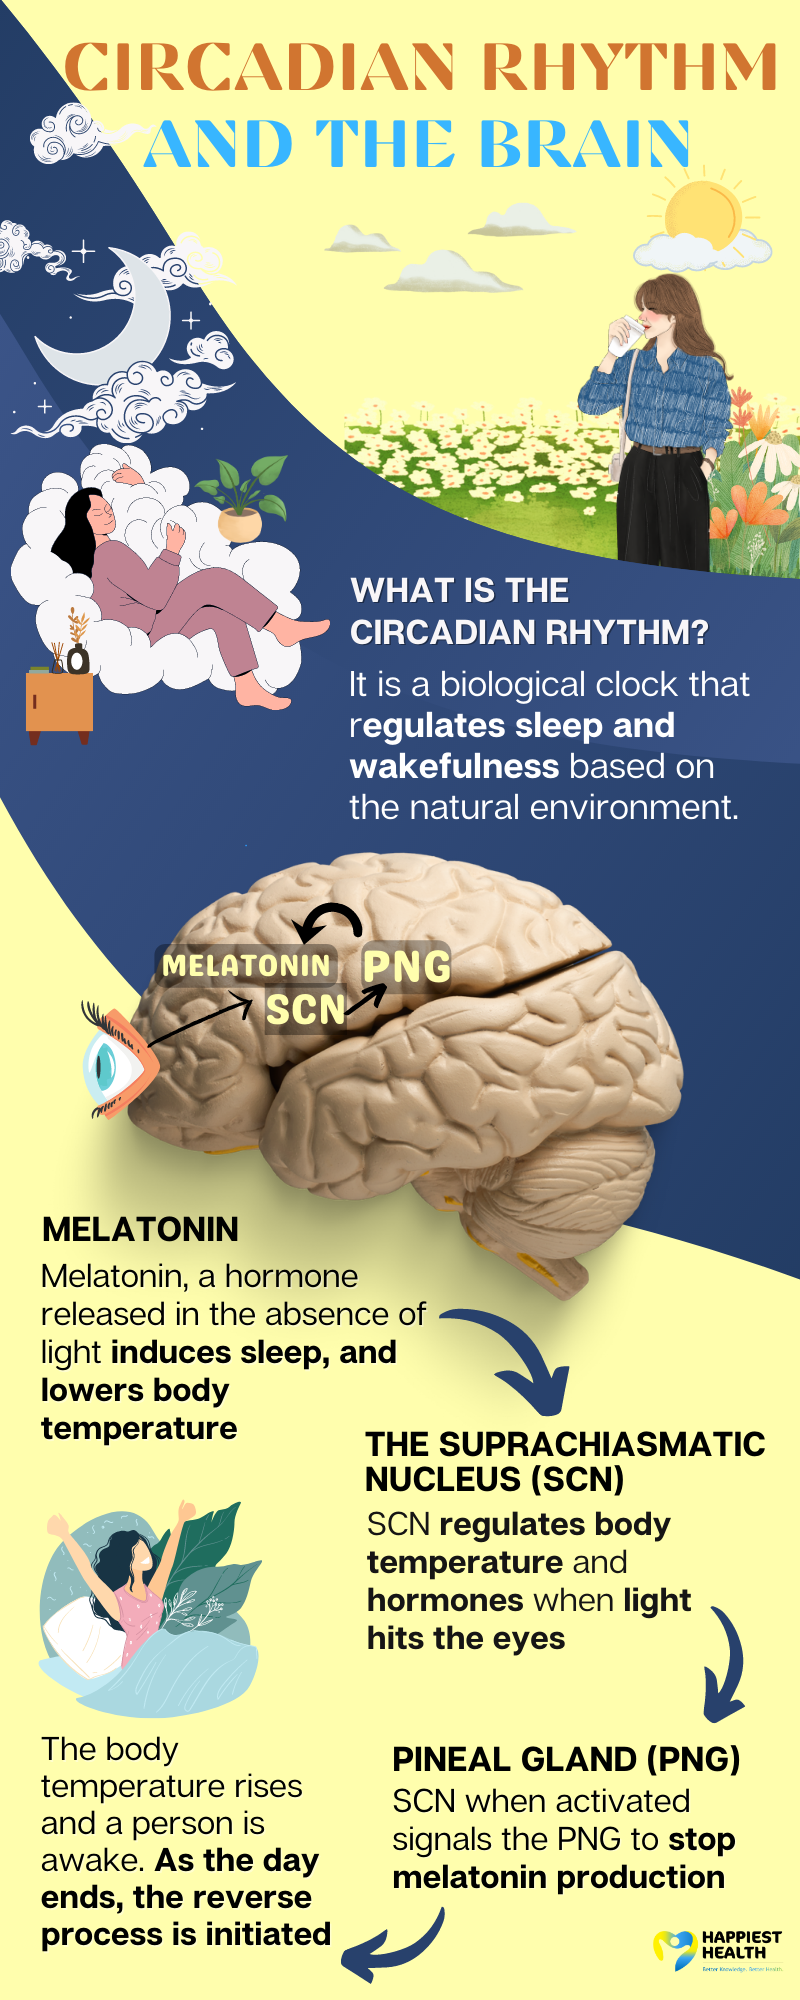 Circadian rhythm on the brain - It is a biological clock that regulates sleep and wakefulness based on the natural environment. Suprachiasmatic Nucleus (SCN) regulates body temperature and hormones when light hits the eyes. SCN when activated signals the pineal gland to stop melatonin production. Melatonin a hormone released in the absence of light induces sleep, and lowers body temperature. The body temperature rises, and a person is awake. As the day ends, the reverse process is initiated.